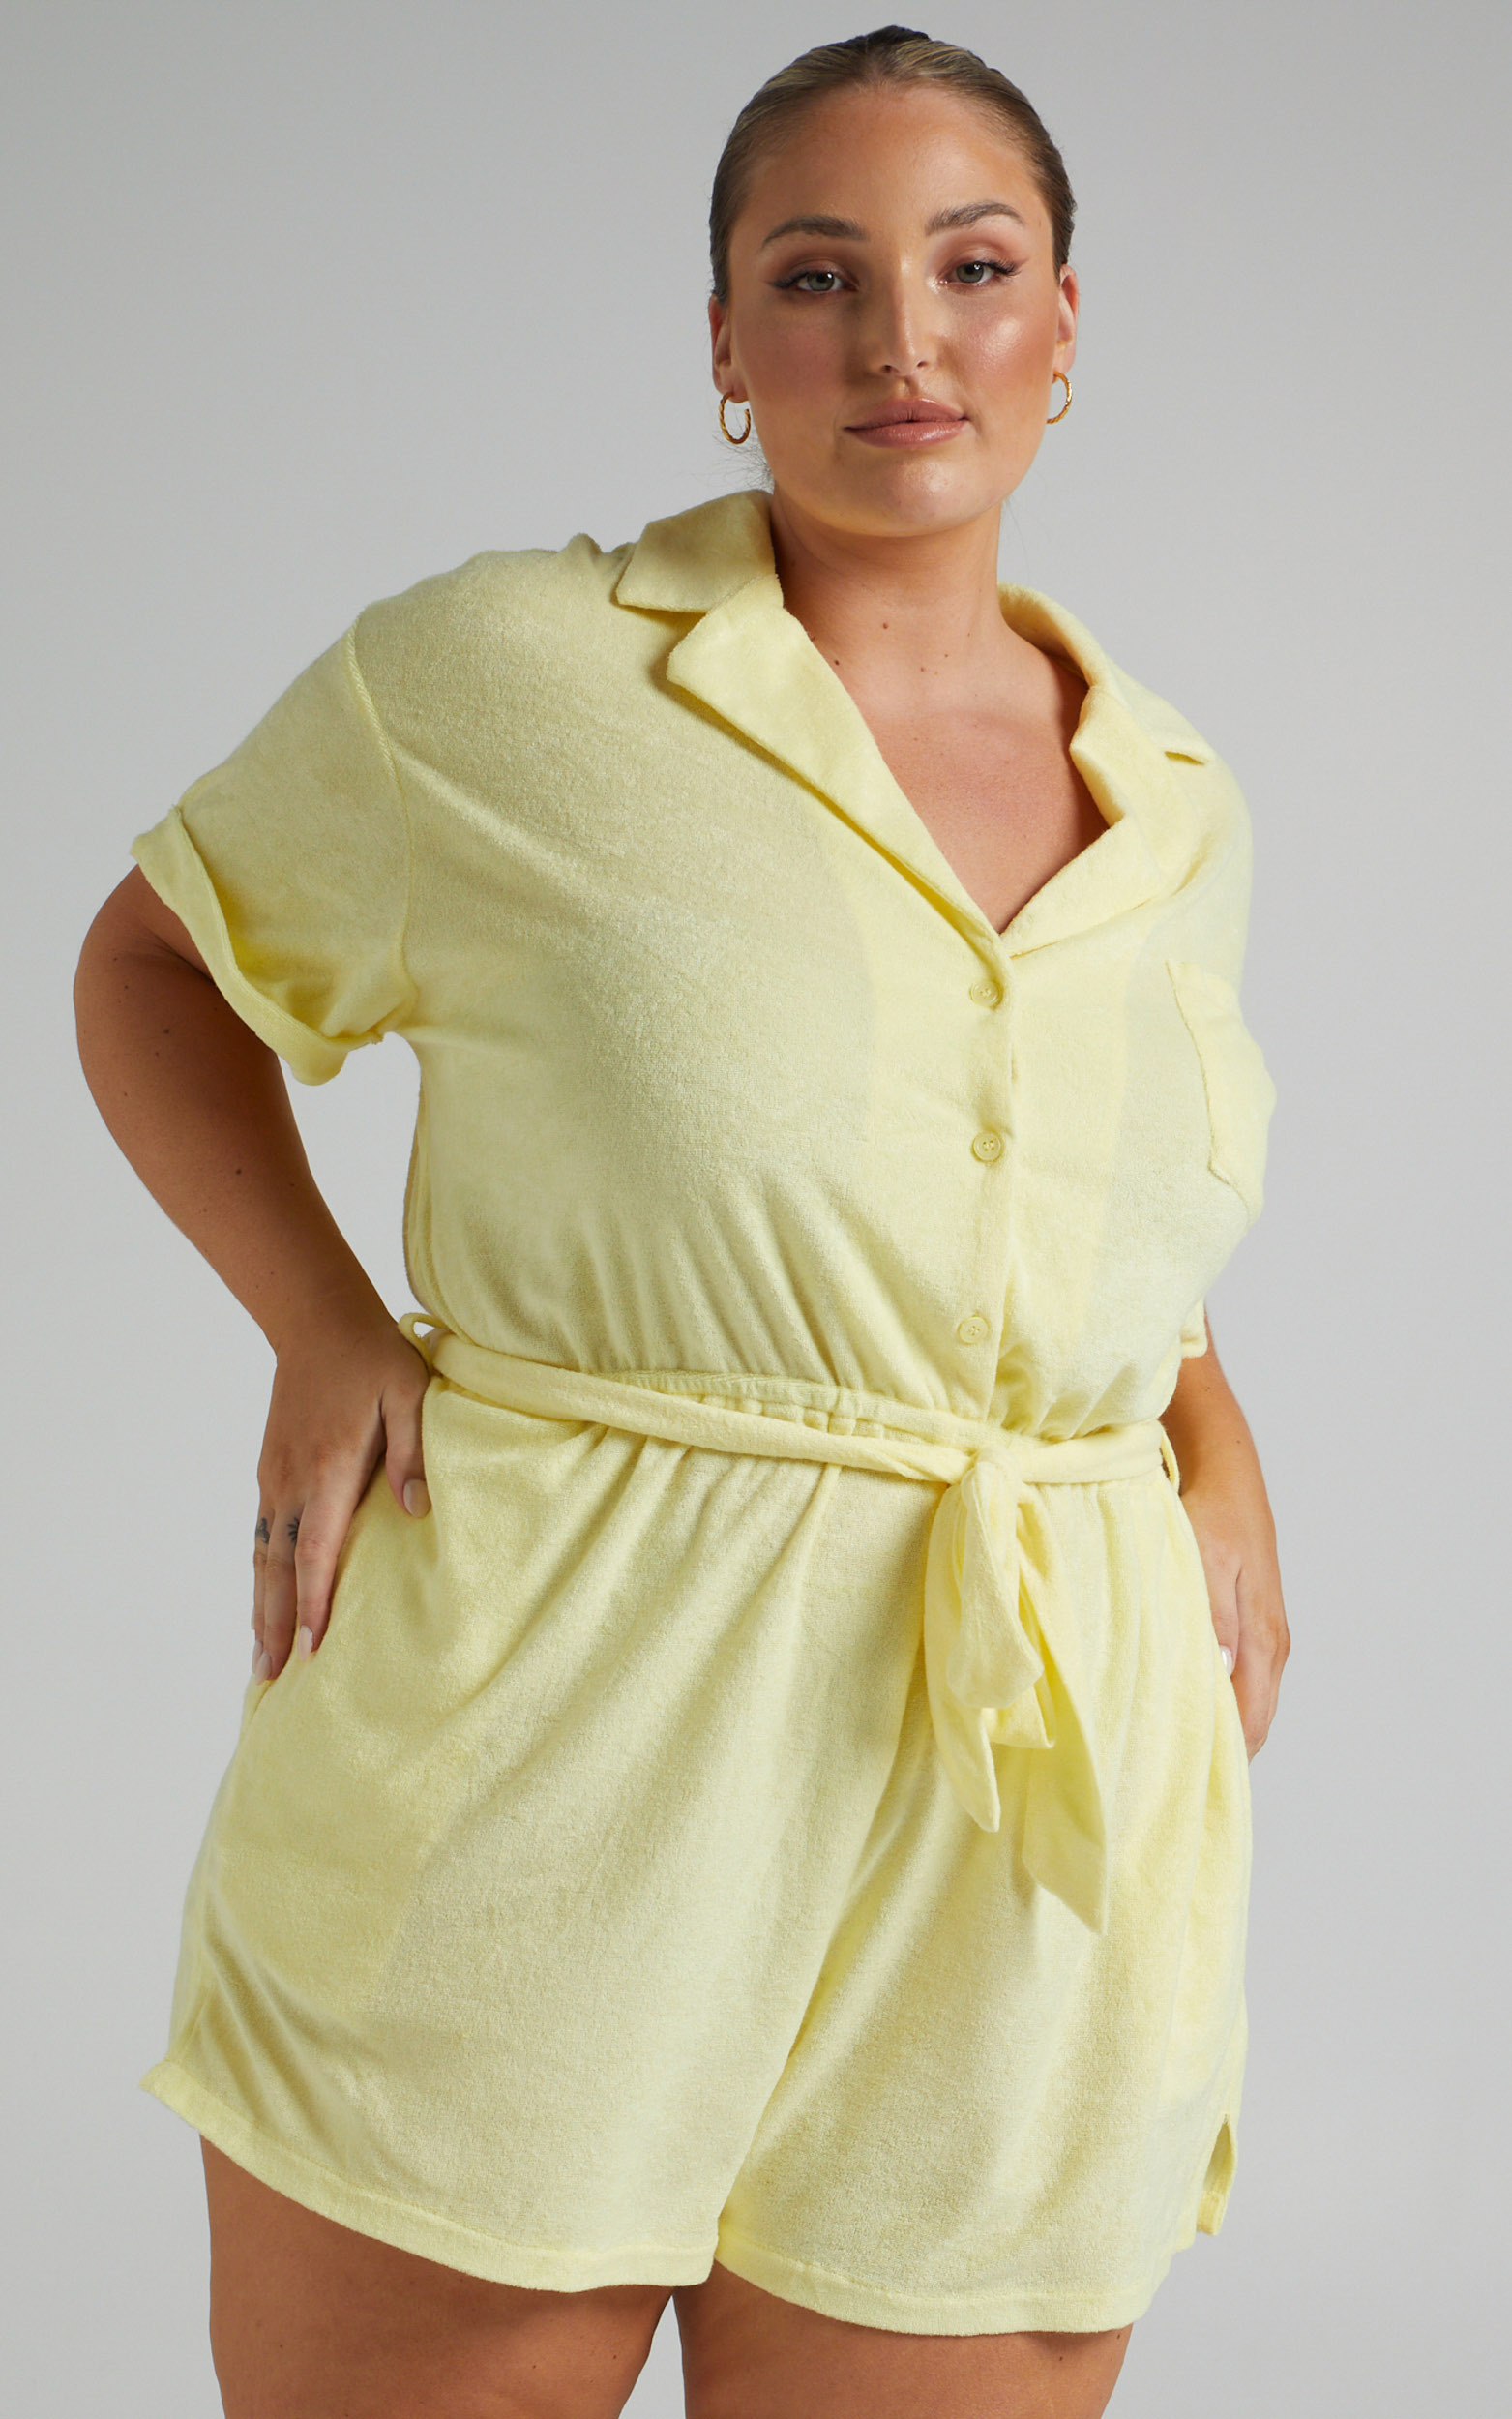 Akaithy Terry Towelling Collared Playsuit in Lemon - 04, YEL2, hi-res image number null